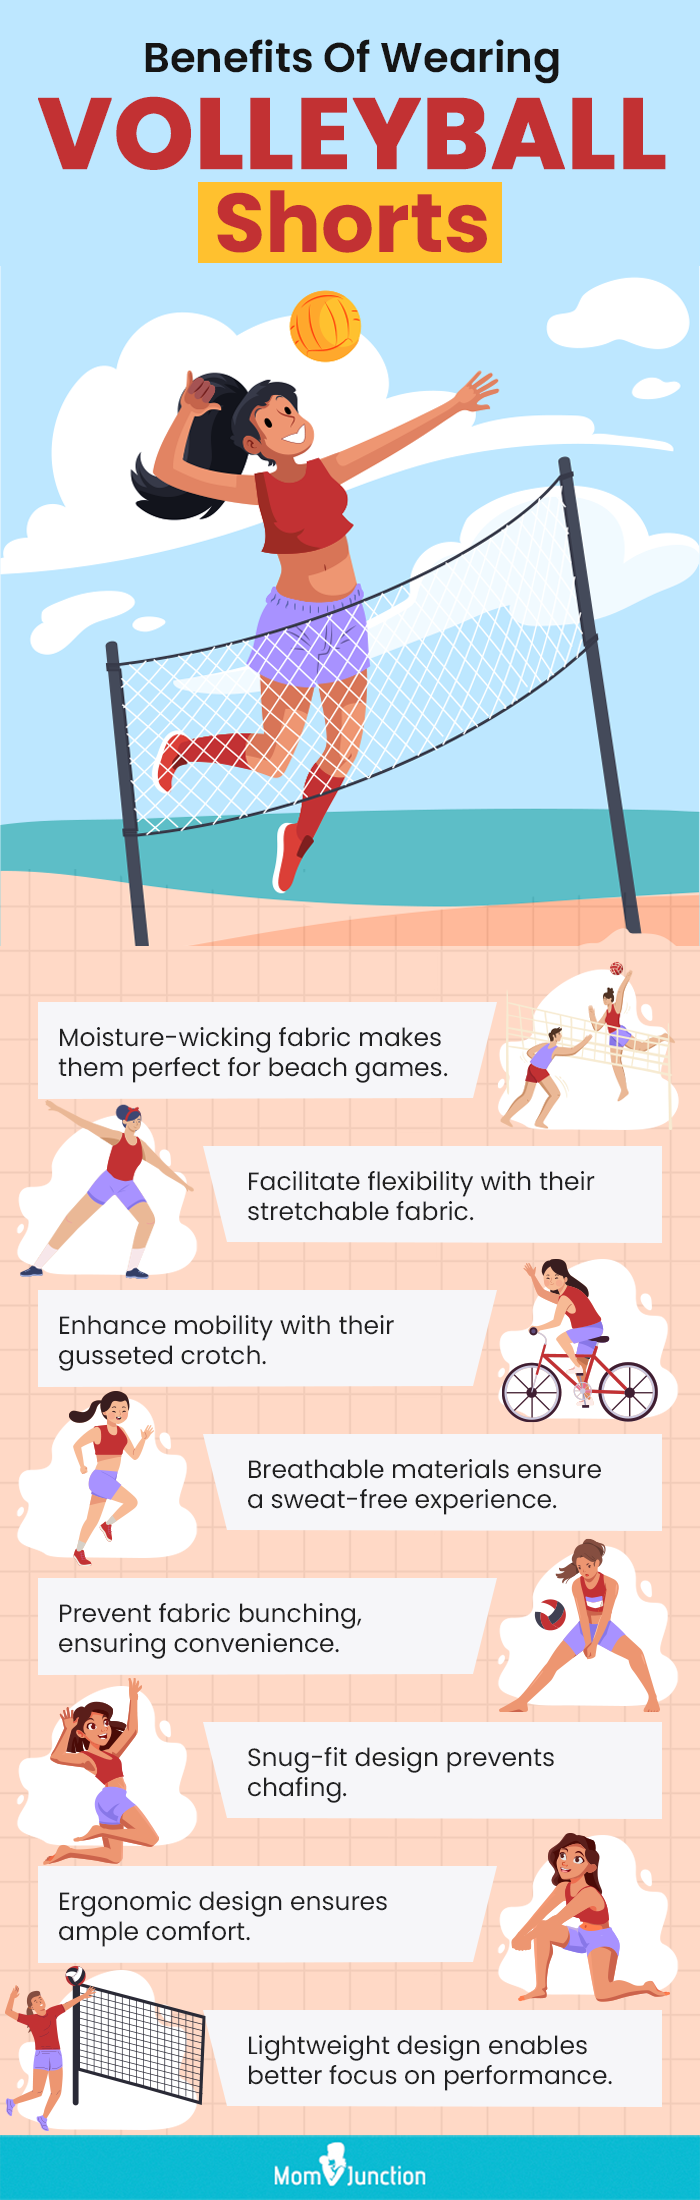 Benefits Of Wearing Volleyball Shorts (infographic)